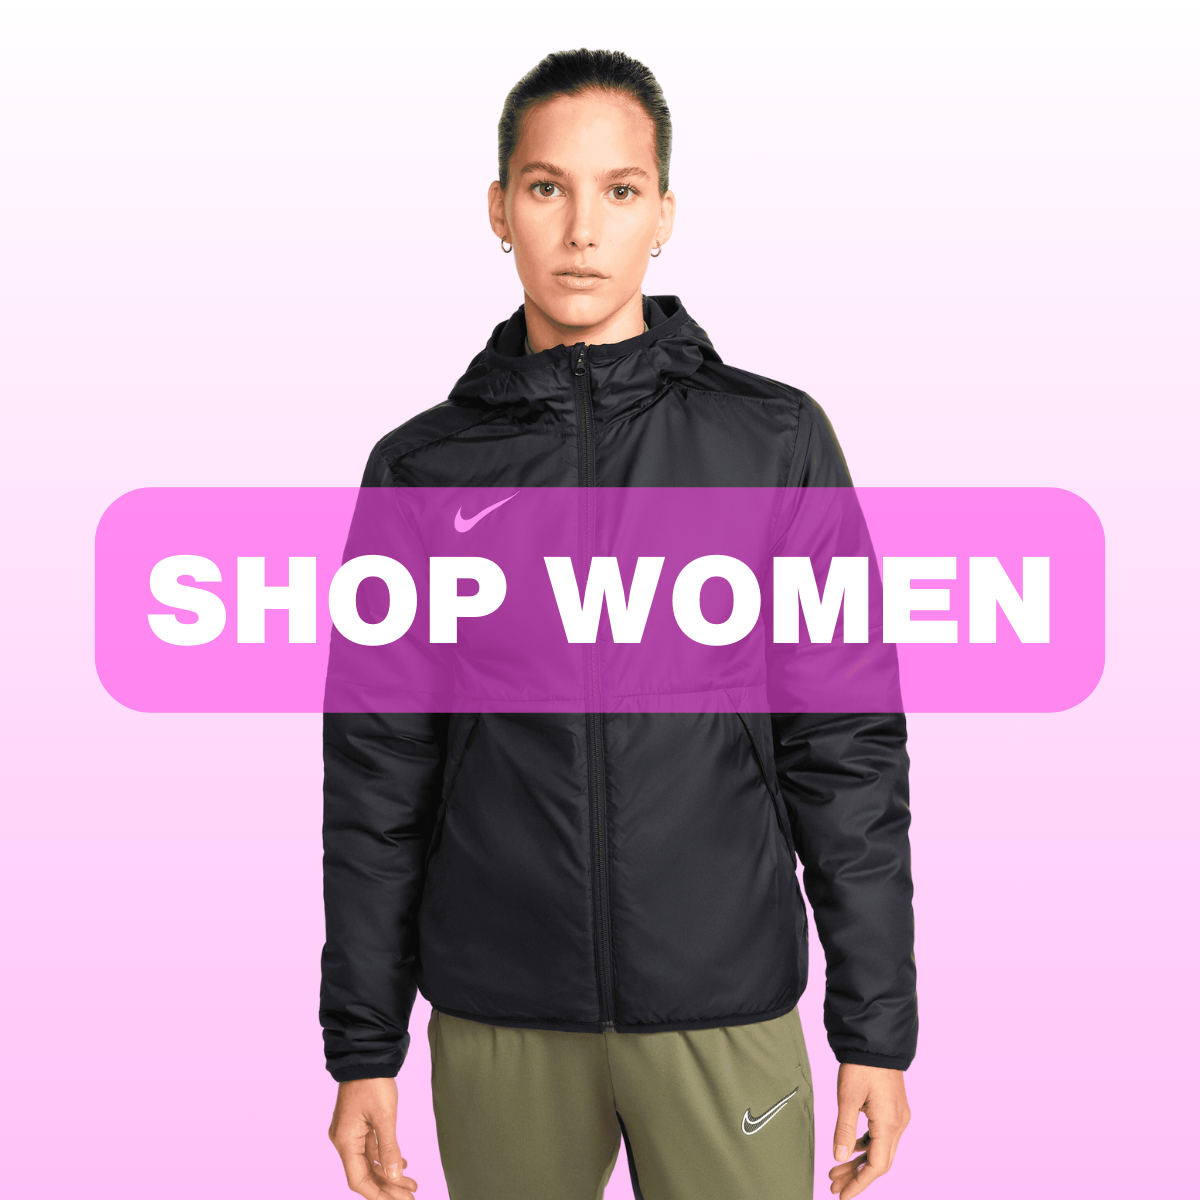 Women's Category (Clothing)